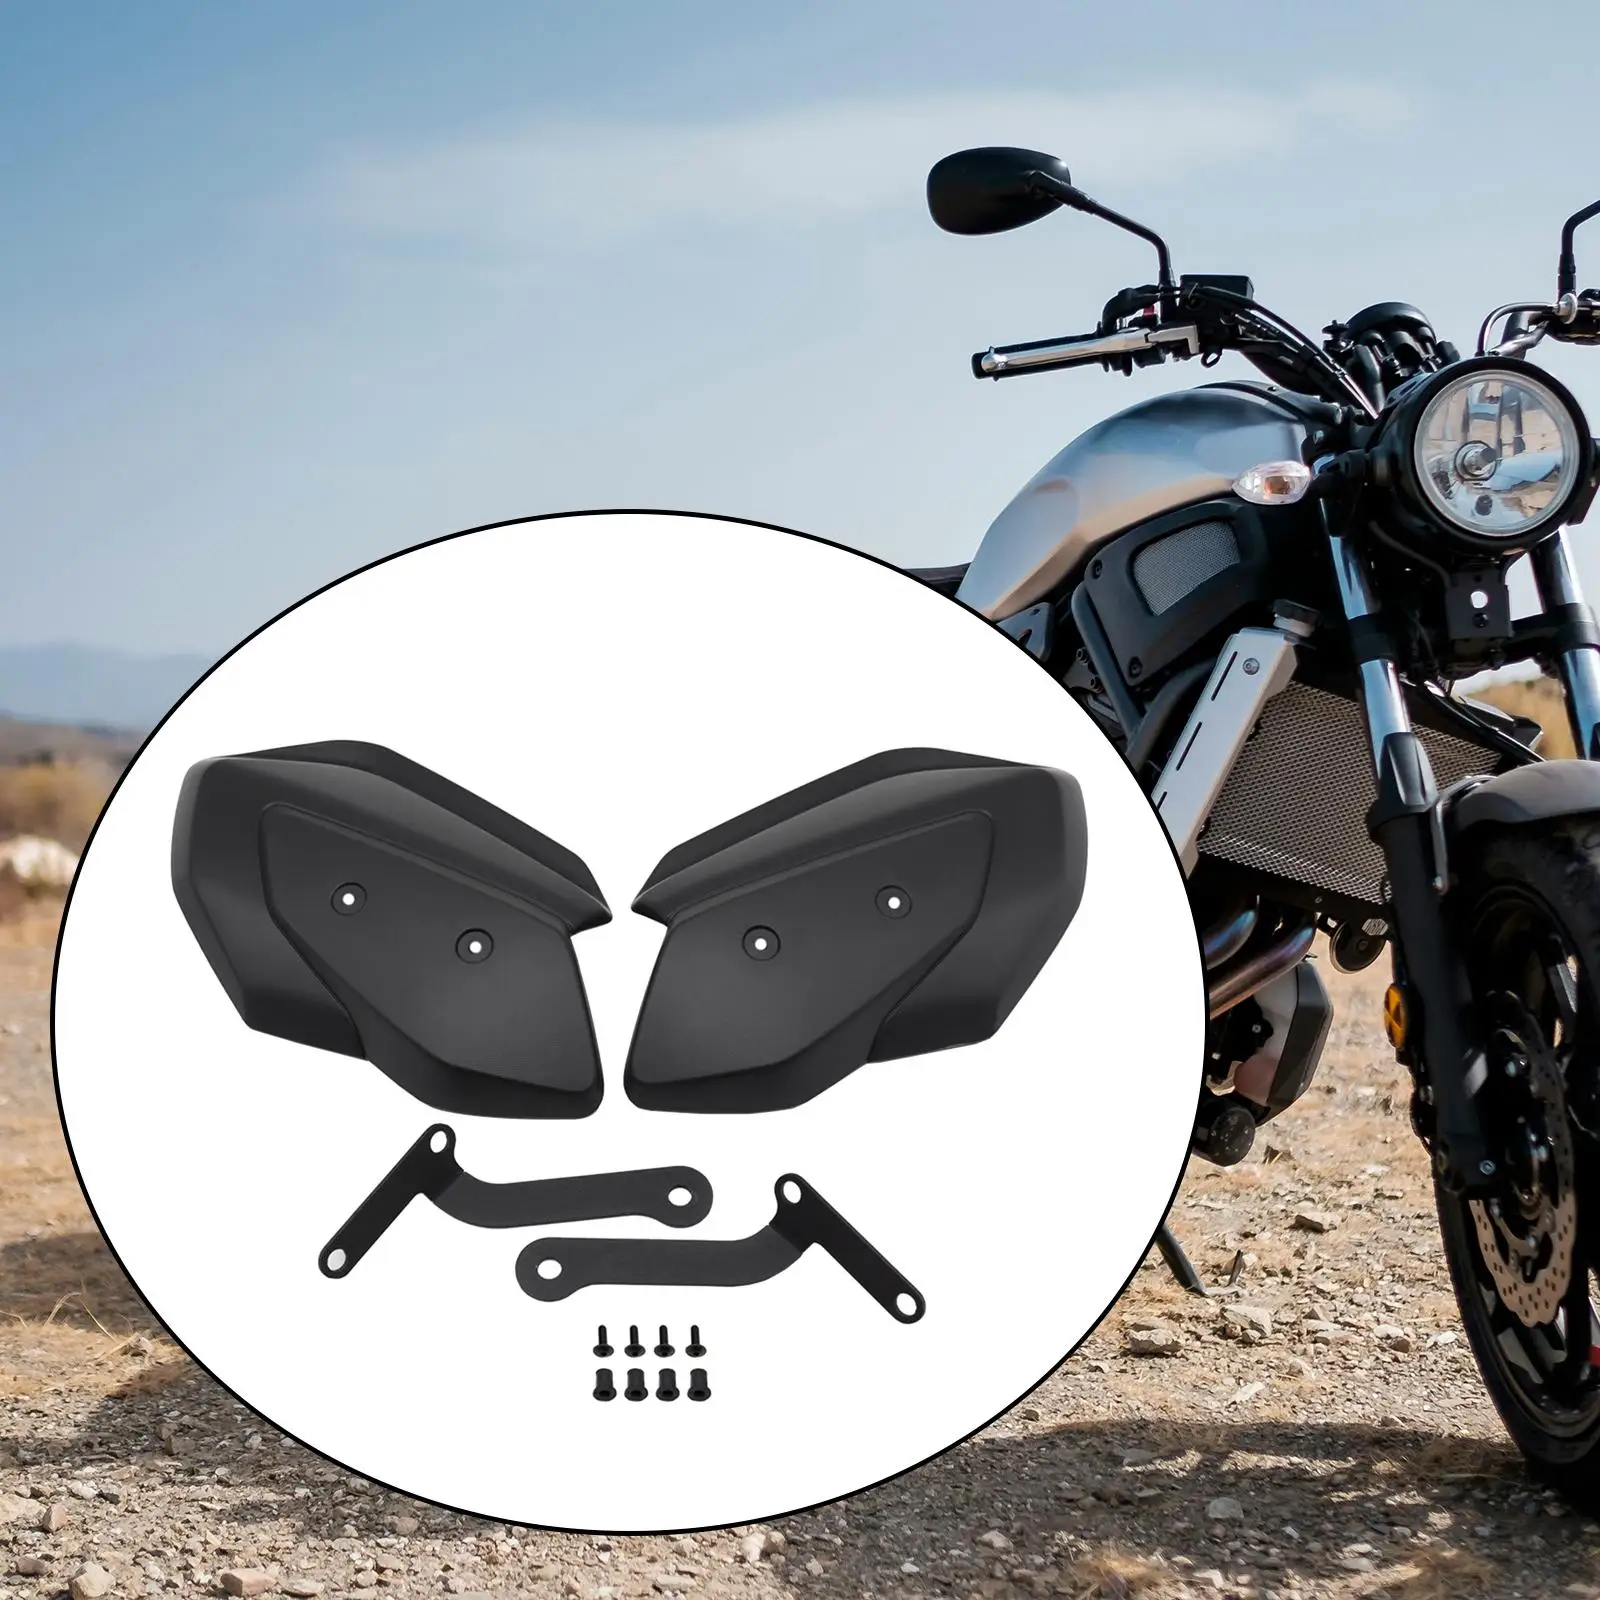 2 Pieces Motorcycle Handguards Handle Bar Guard Protector for Xmax 125